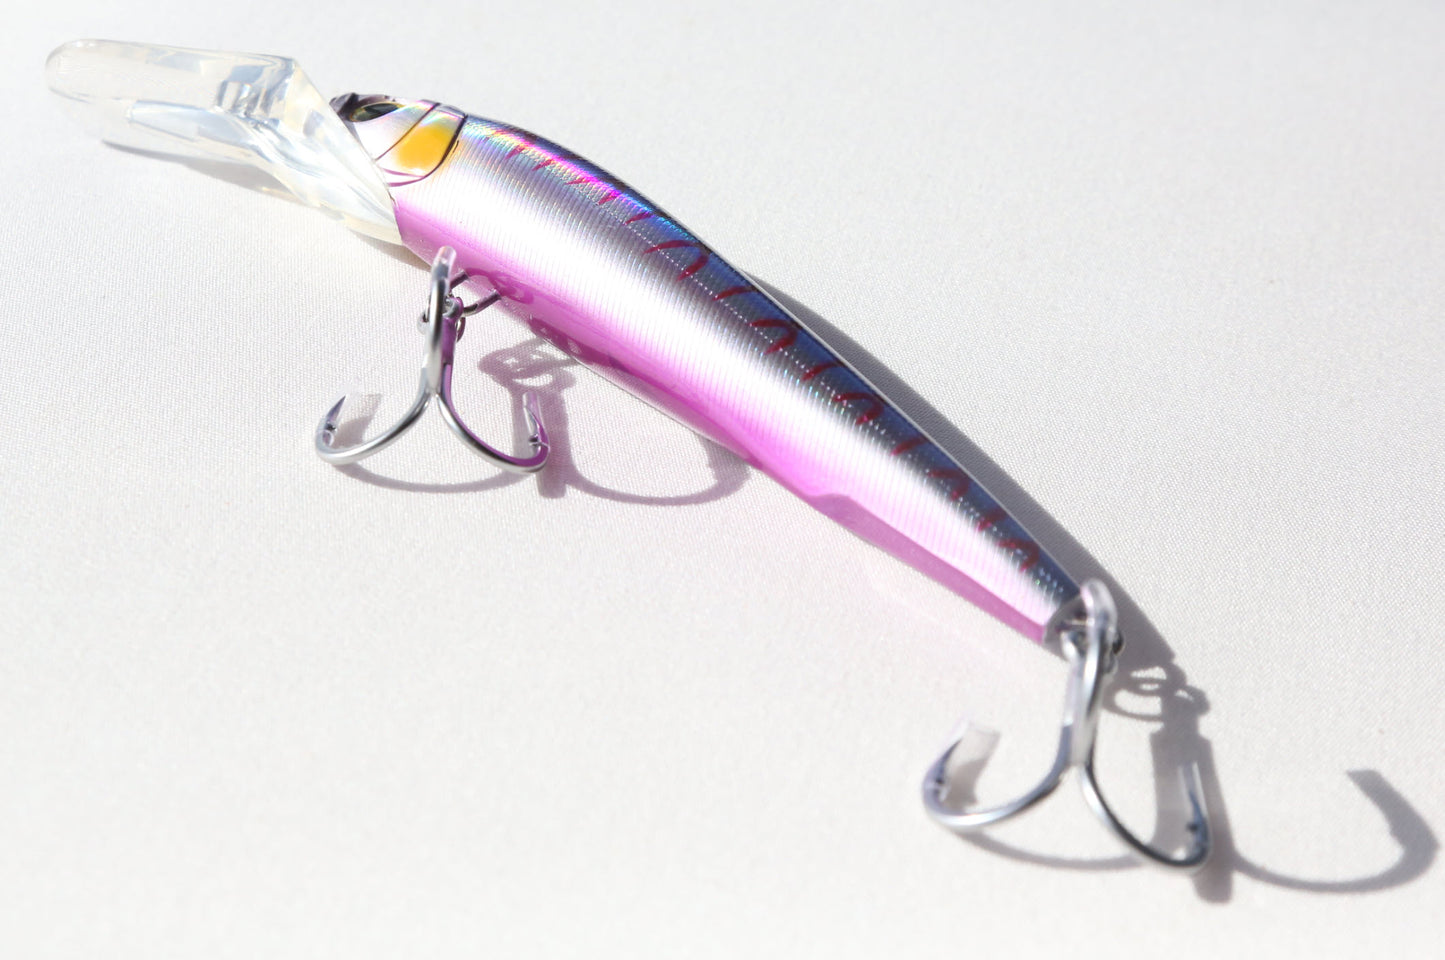 *NEW *Deep Diver Trolling Lure